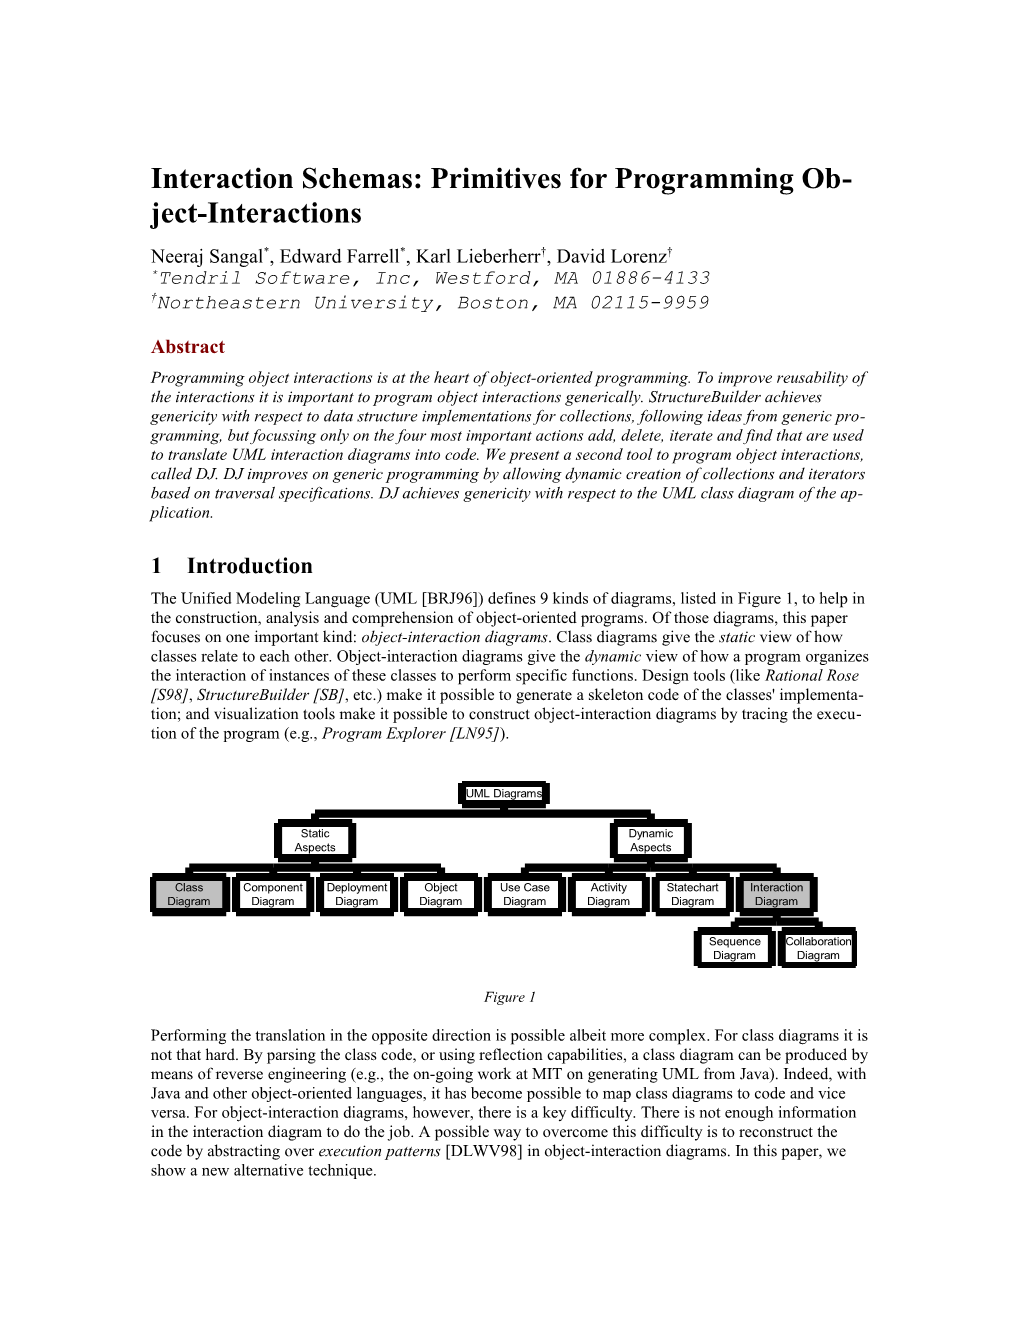 Interaction Schemas: Primitives for Programming Ob-Ject-Interactions